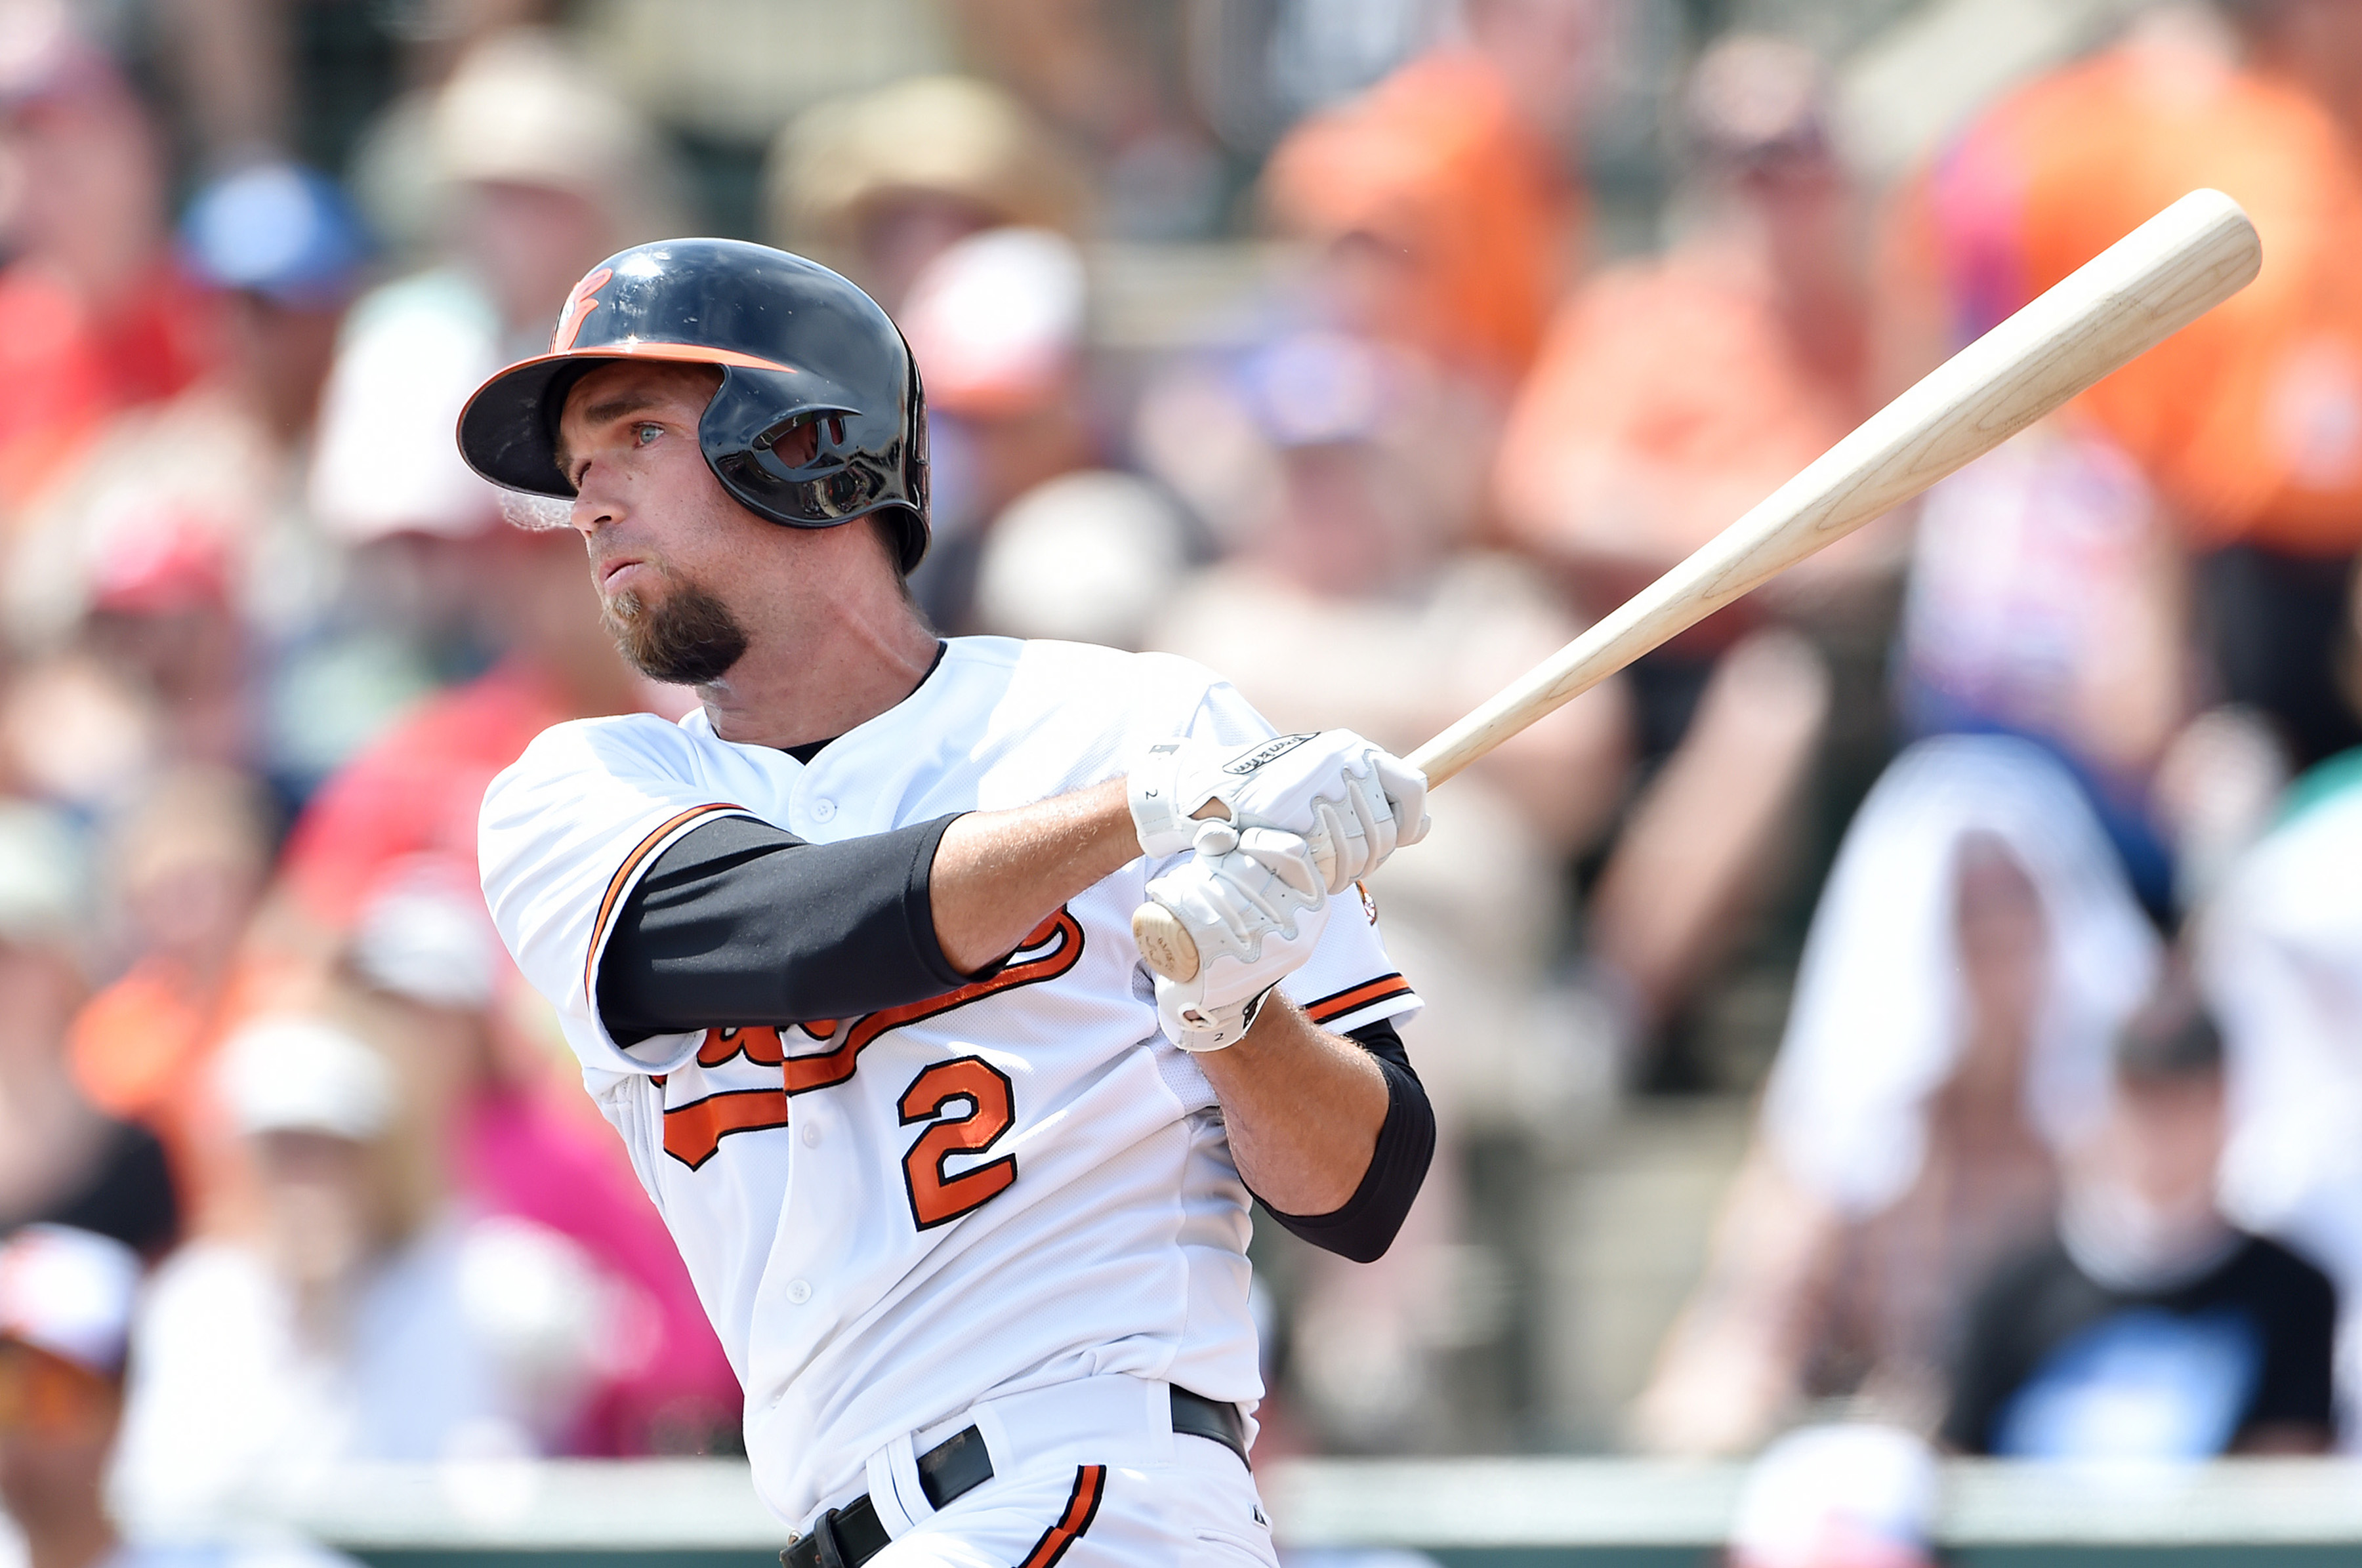 VIDEO: J.J. Hardy Smacks Two Home Runs to Keep Orioles Undefeated